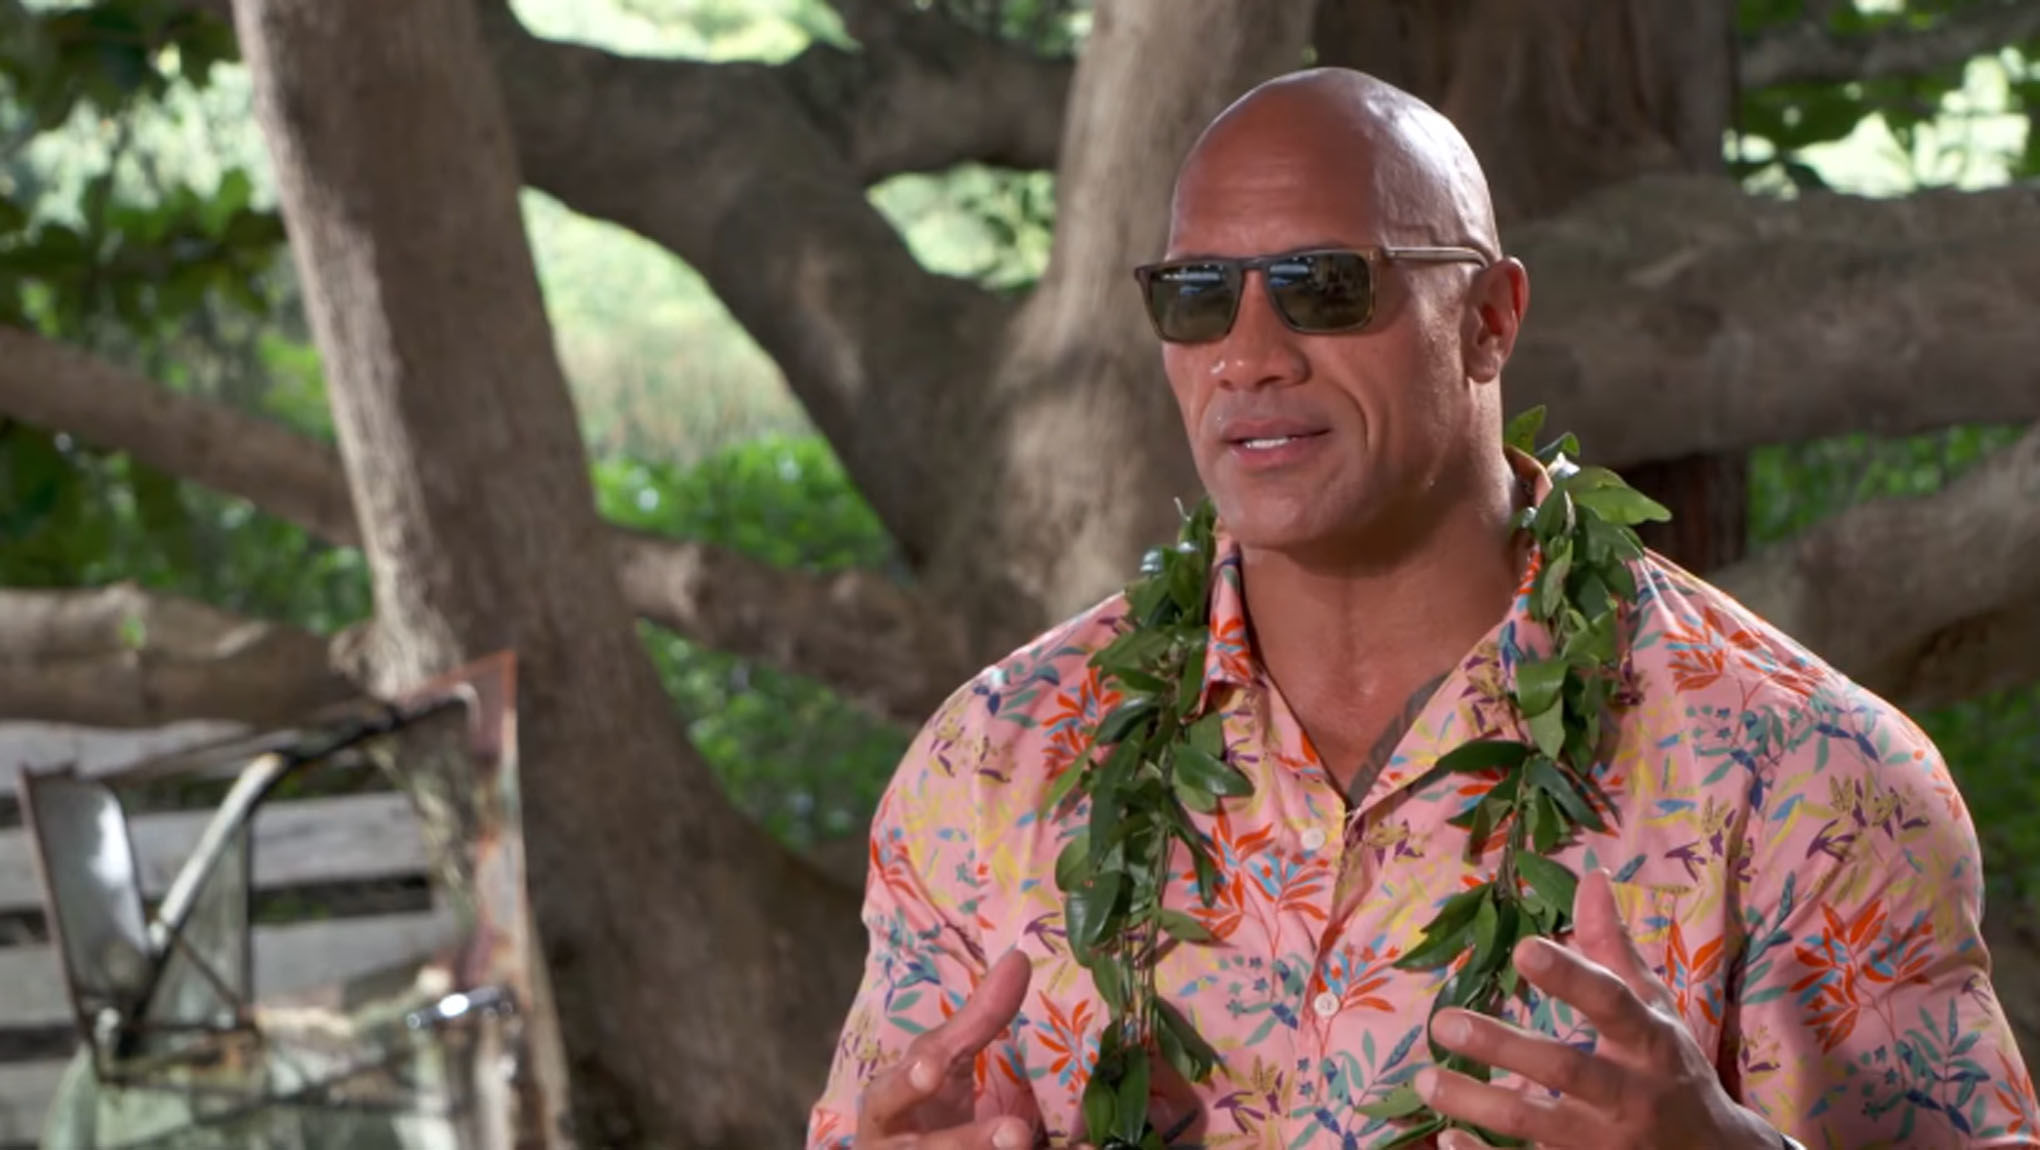 Dwayne Johnson Talks Family in Hobbs and Shaw